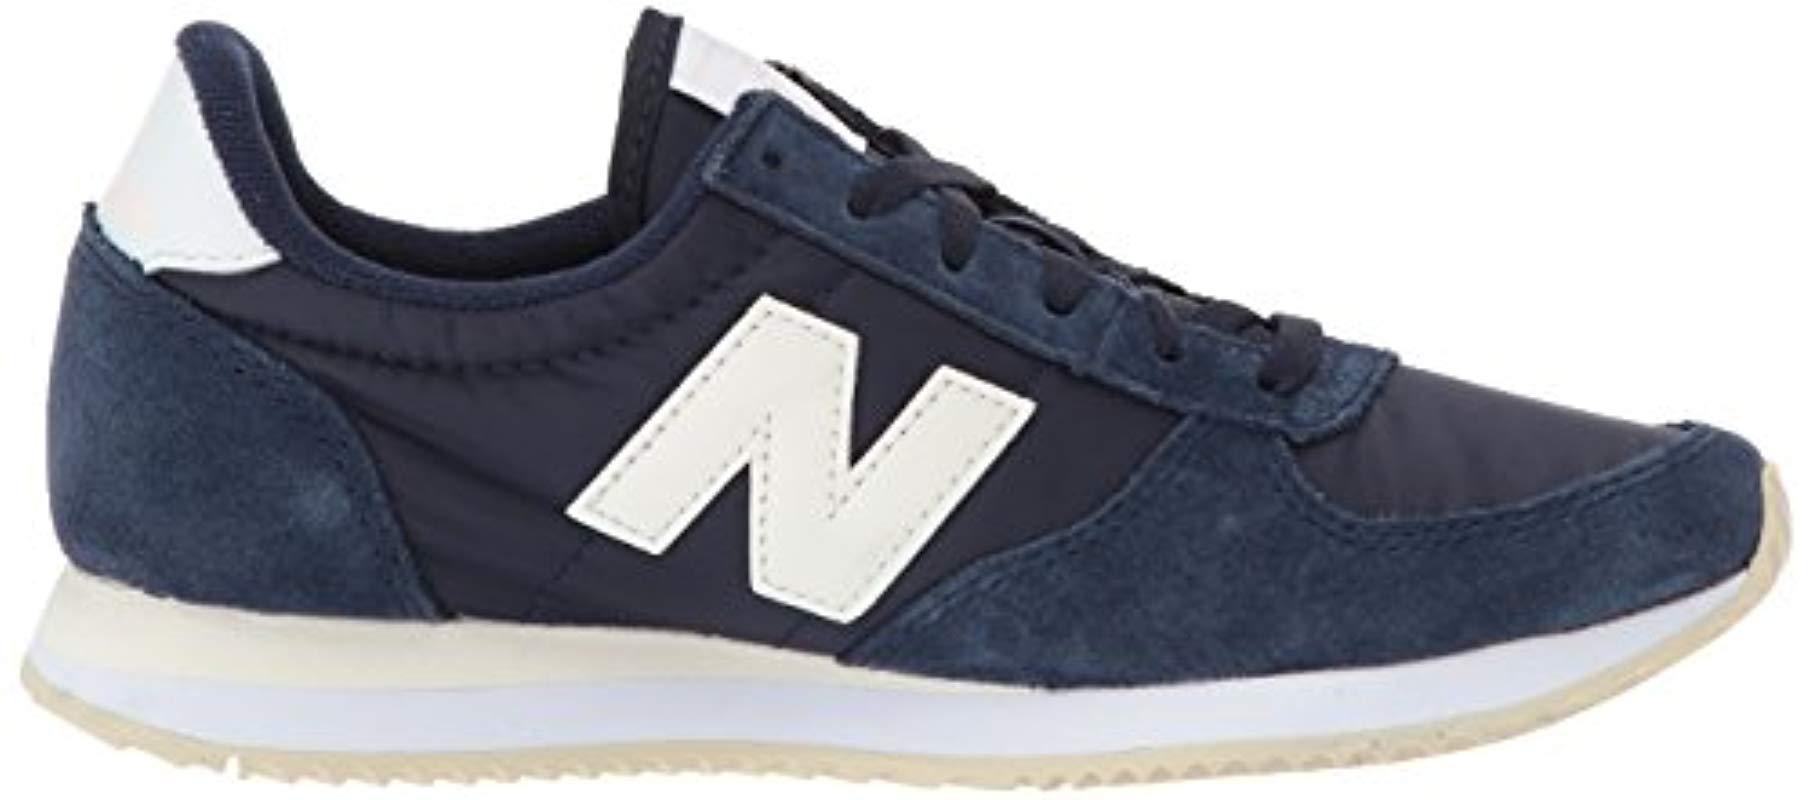 New Balance Synthetic 220 Classic V1 Sneaker in Black/White (Blue) - Save  79% - Lyst